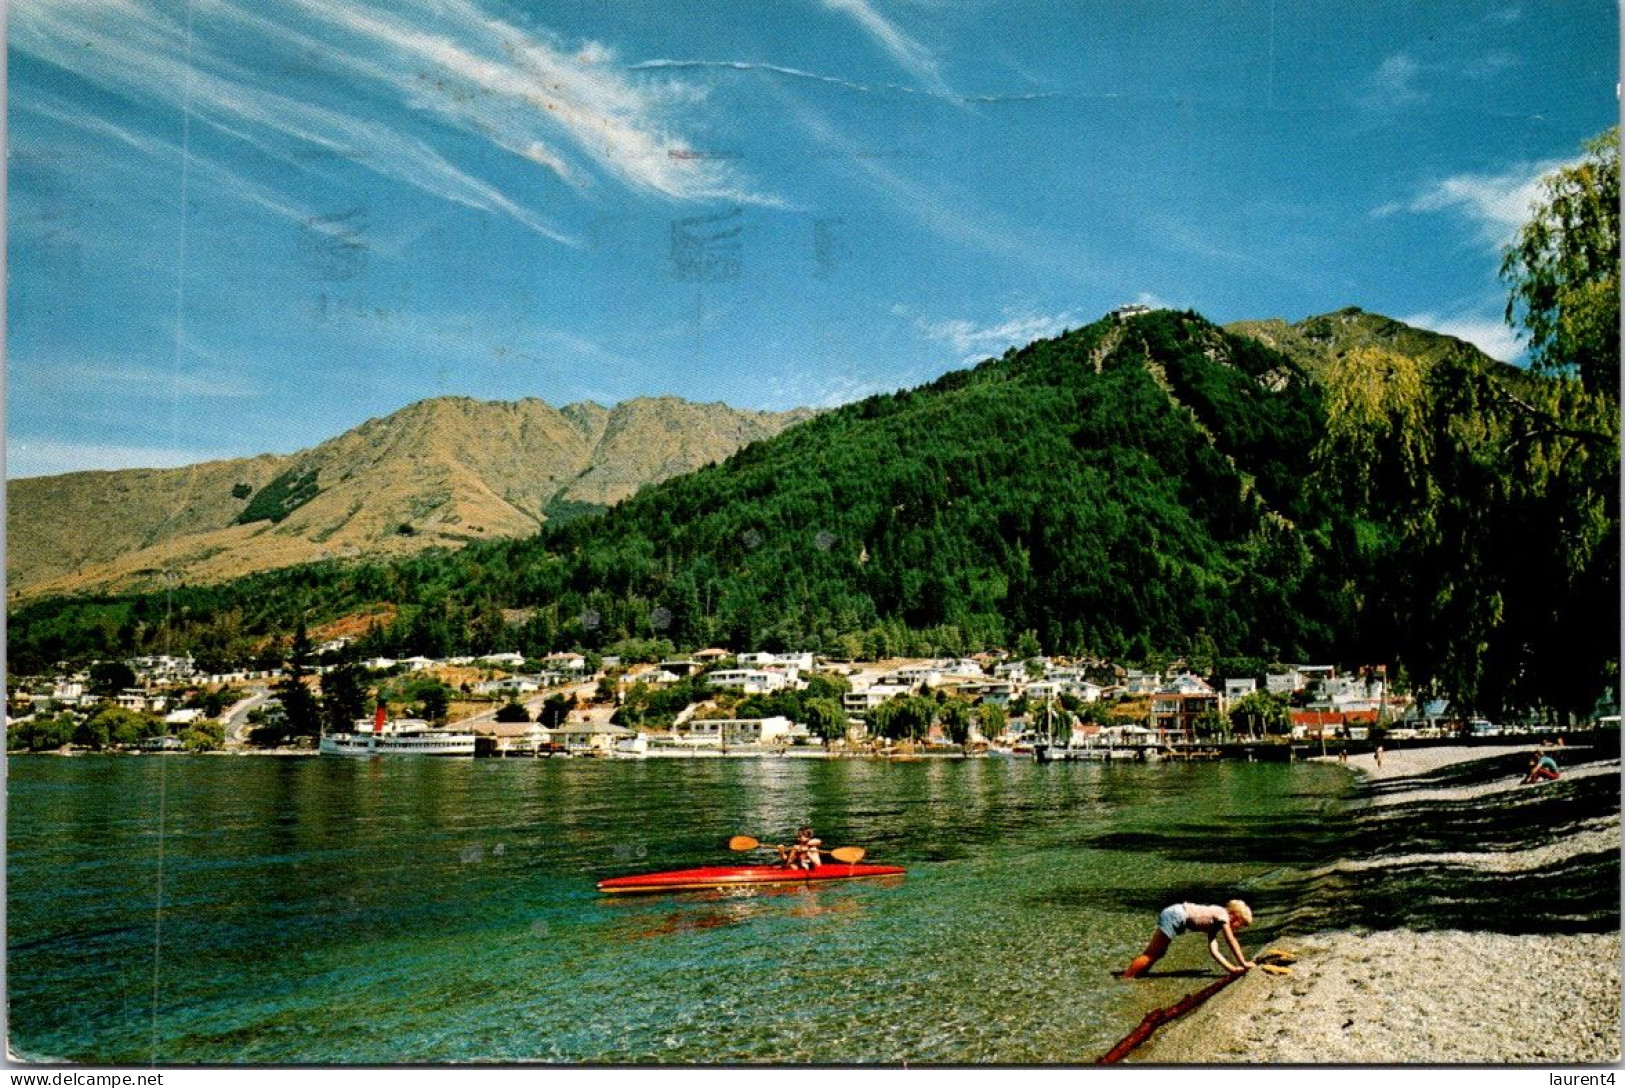 6-4-2024 (1 Z 14) New Zealand - Queenstown Lake (posted To Australia 1975) - Nouvelle-Zélande